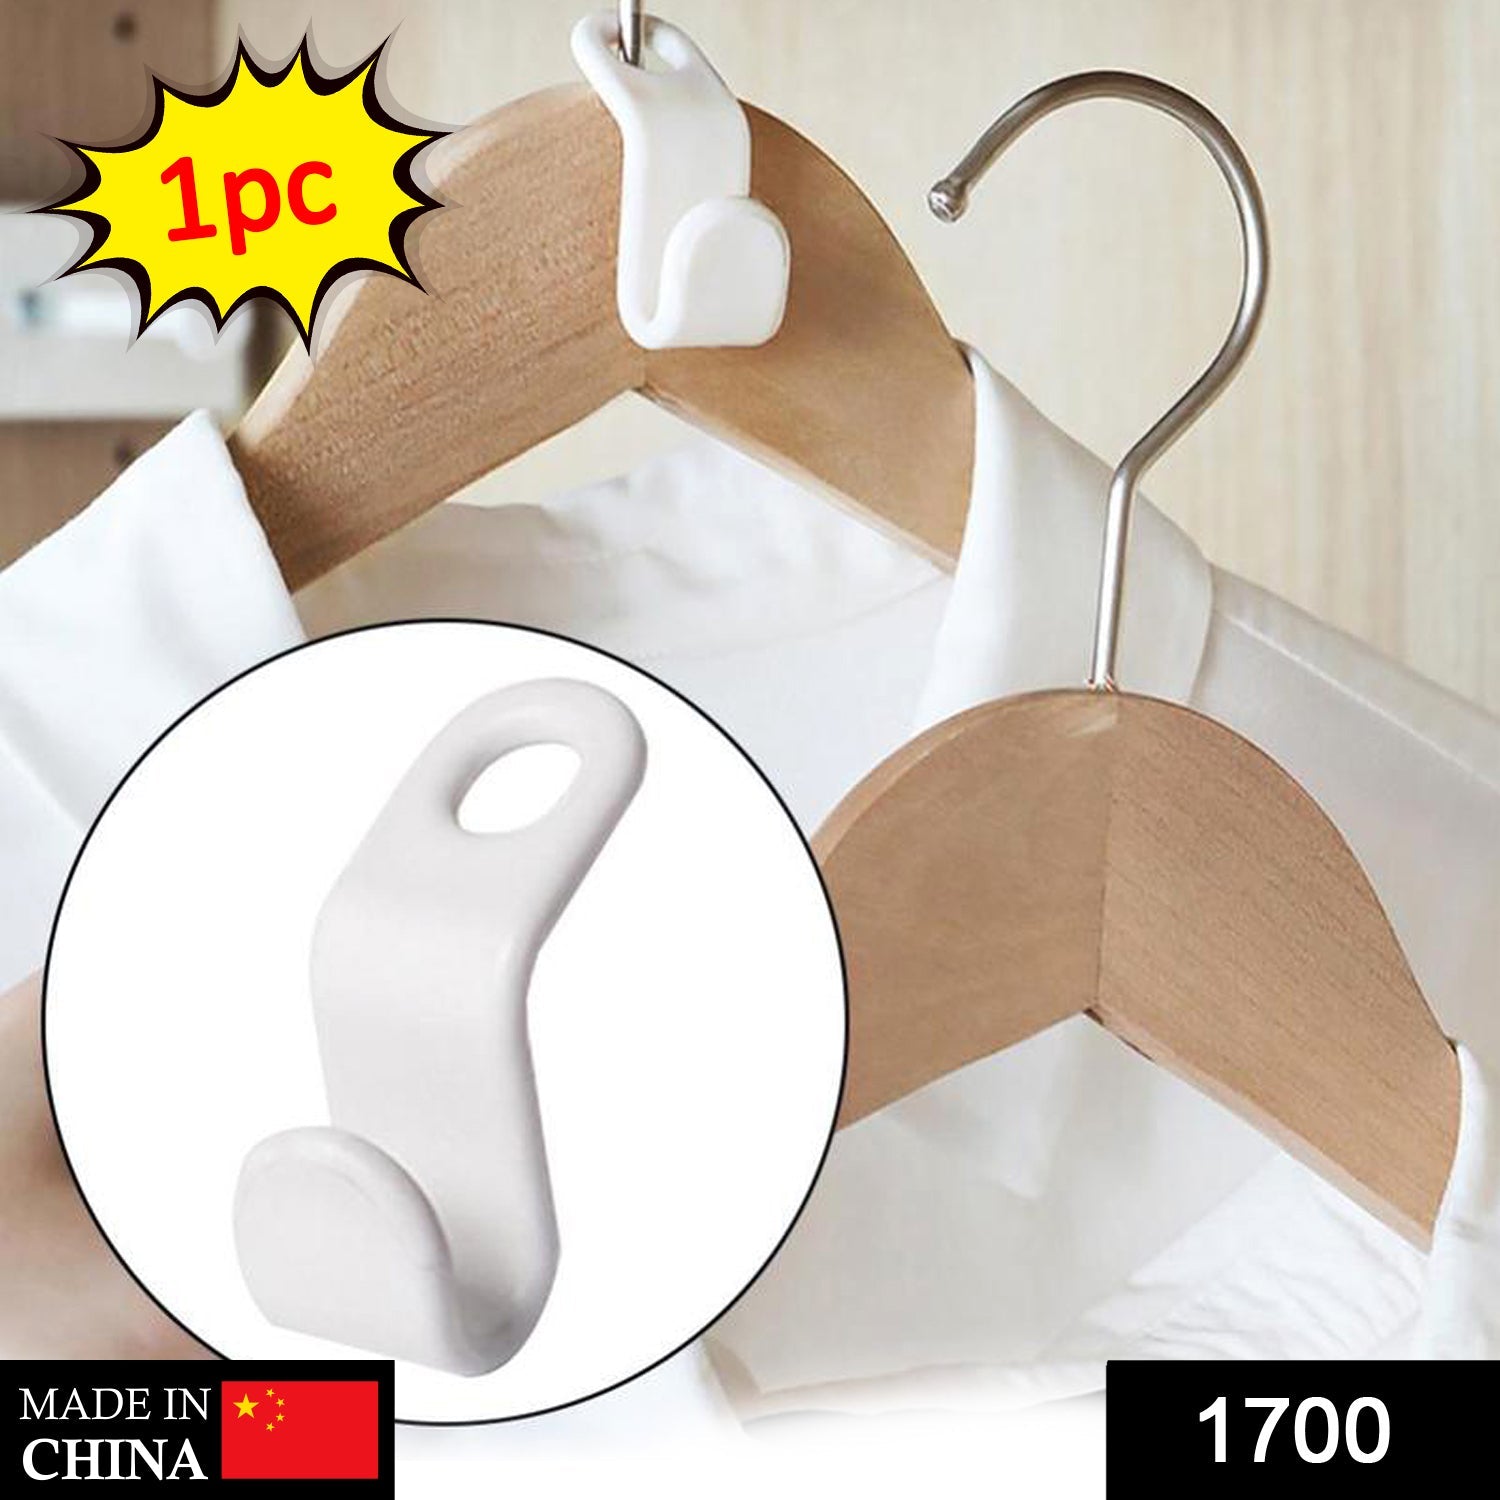 1700 Plastic Clothes Hanger with Non-Slip Pad freeshipping - Your Brand